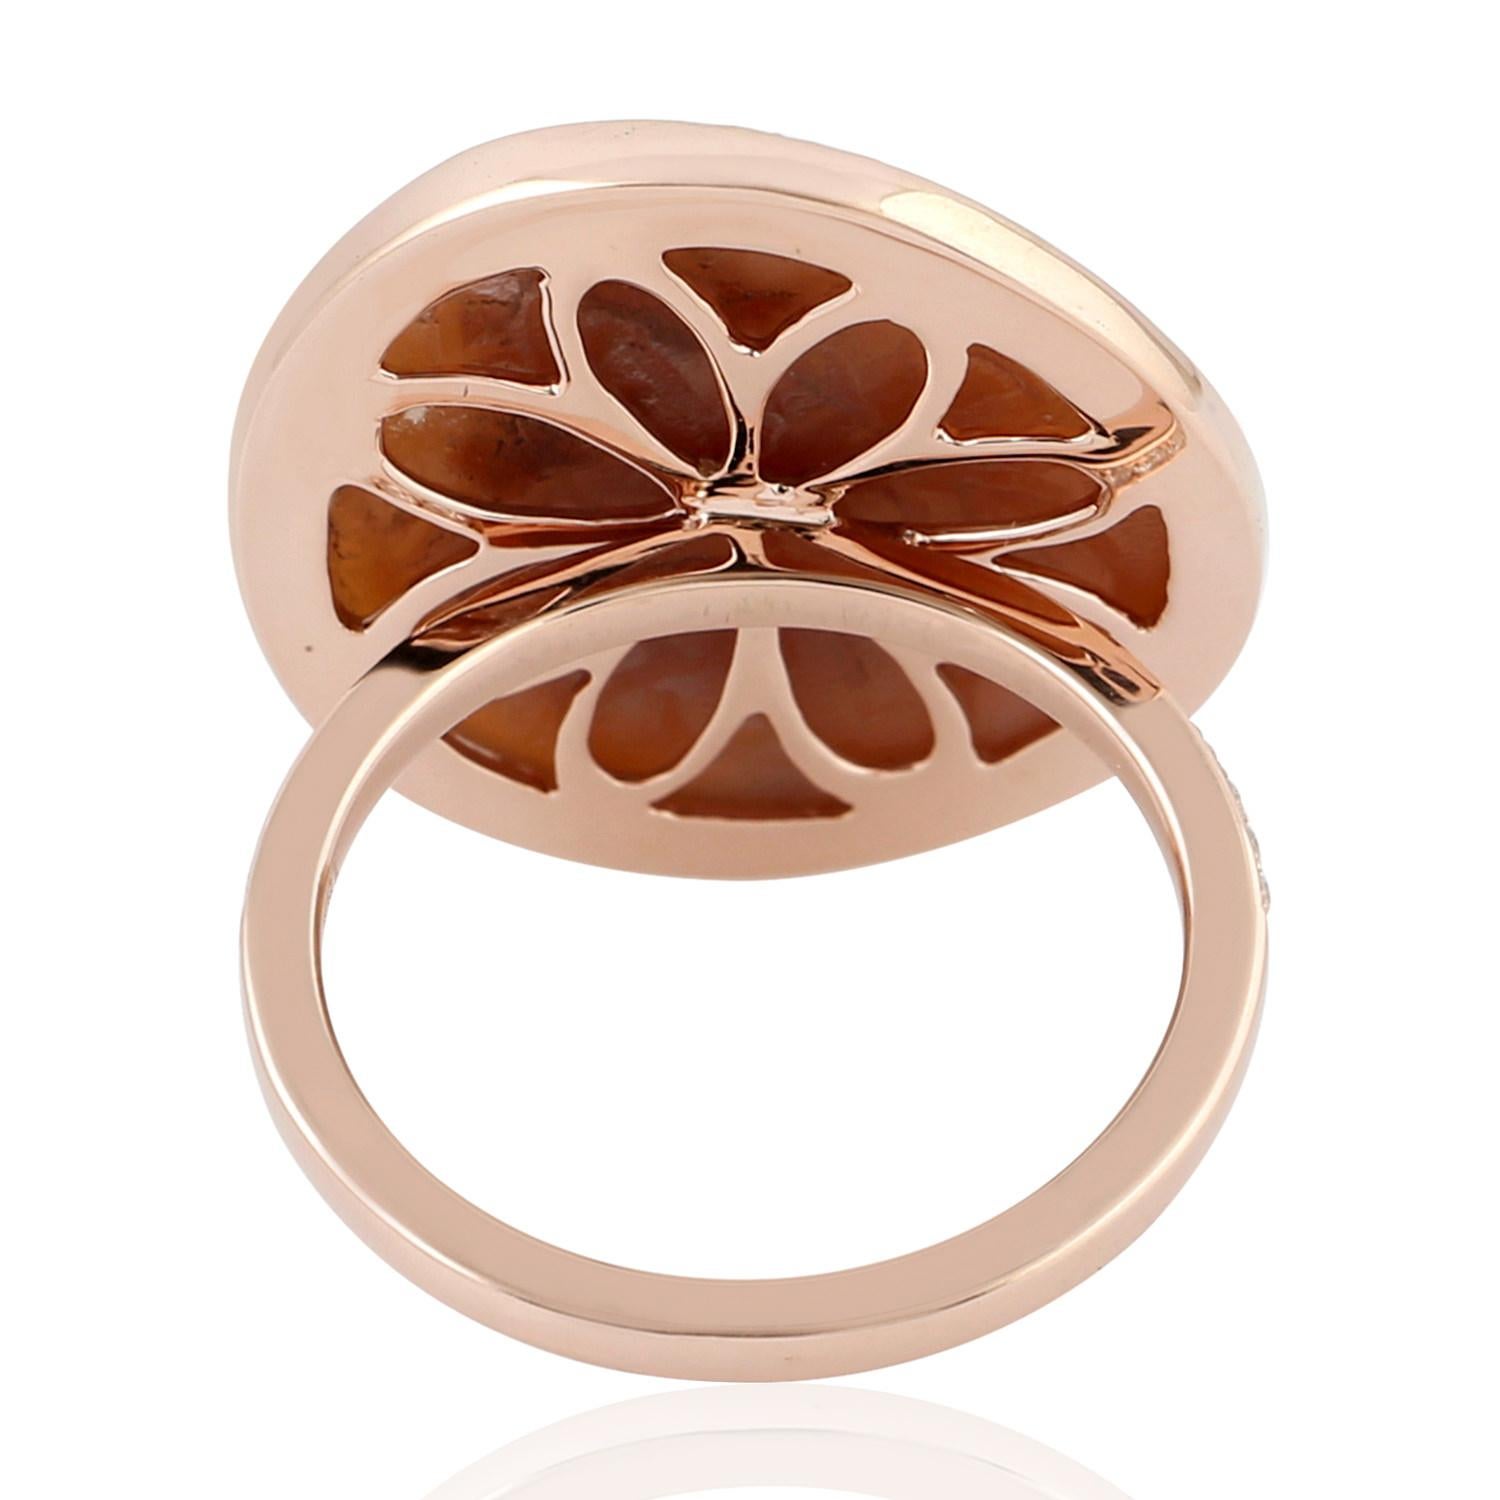 18k Rose Gold 0.37 Carat Diamond Pave 7.36 Carat Cameo Cocktail Ring Size US 7

Beautiful retro style ring in 18k rose gold with a central cameo surrounded by white diamonds.

This ring is totally handmade by goldsmiths
We guarantee all products